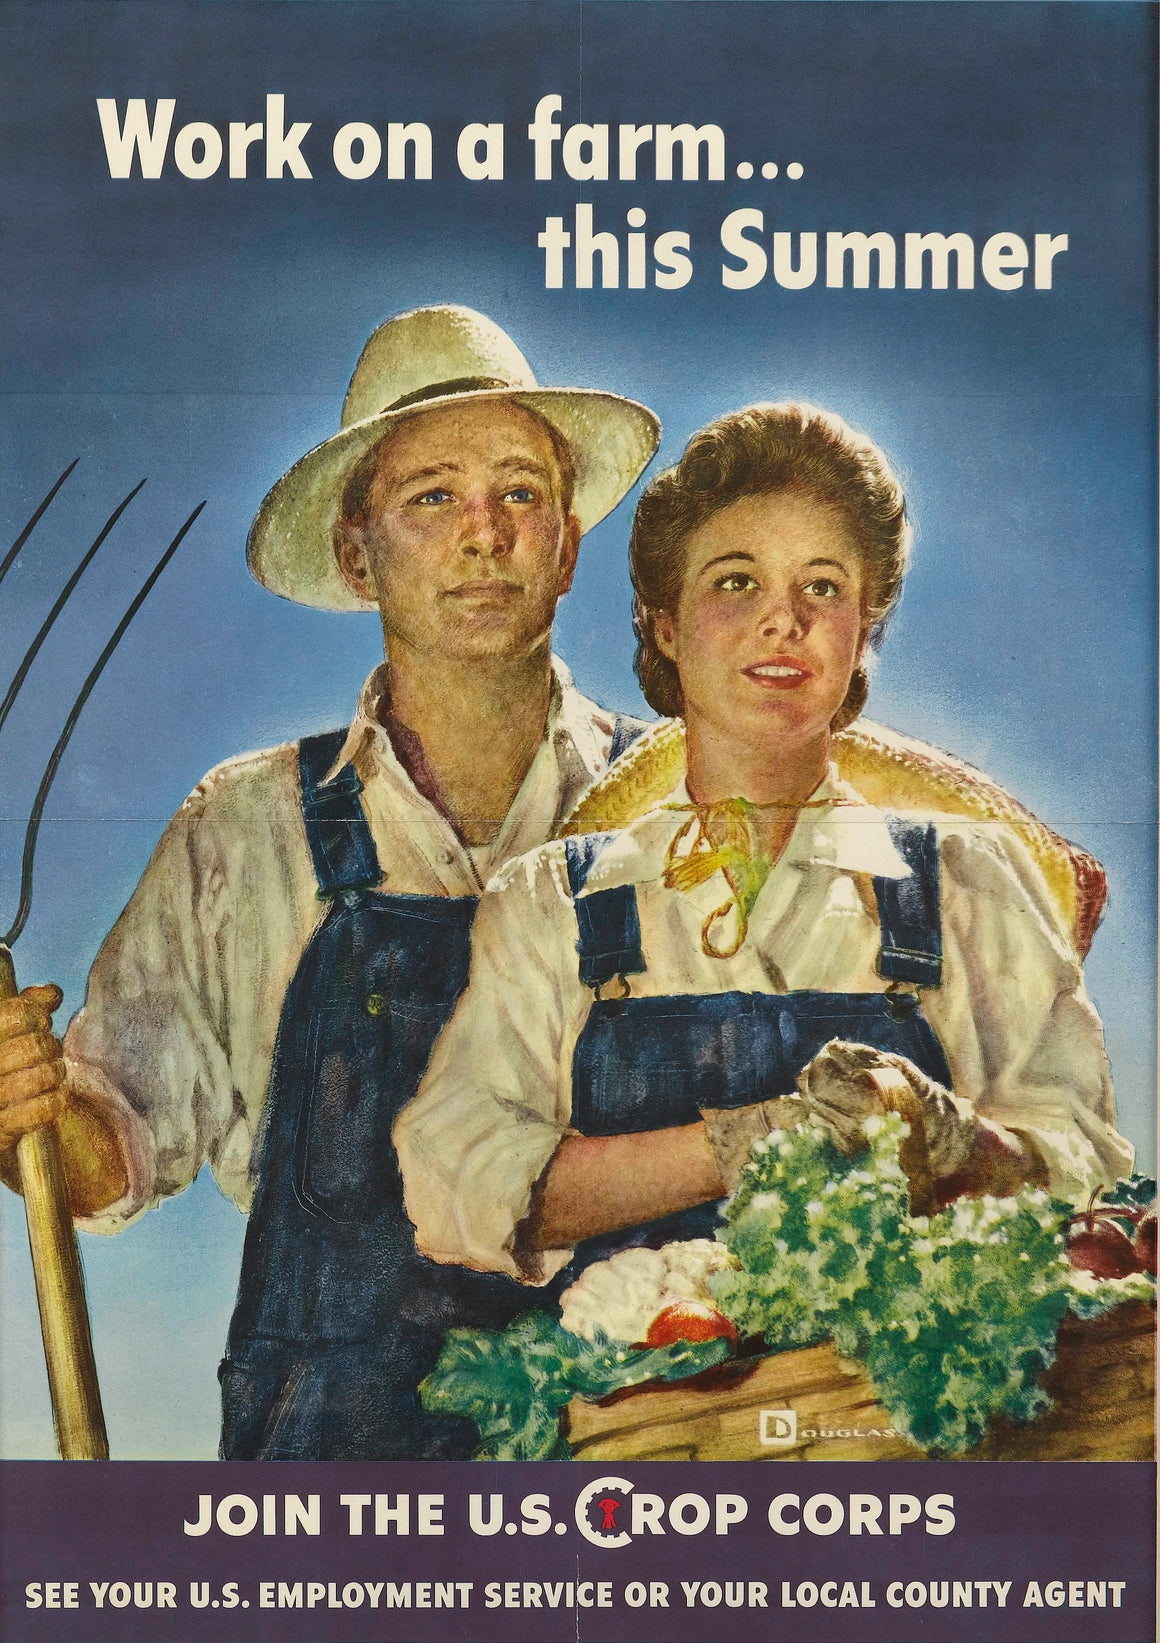 "Work on a farm...this Summer. Join the U.S. Crop Corps" Vintage WWII Recruitment Poster by Douglas, 1943